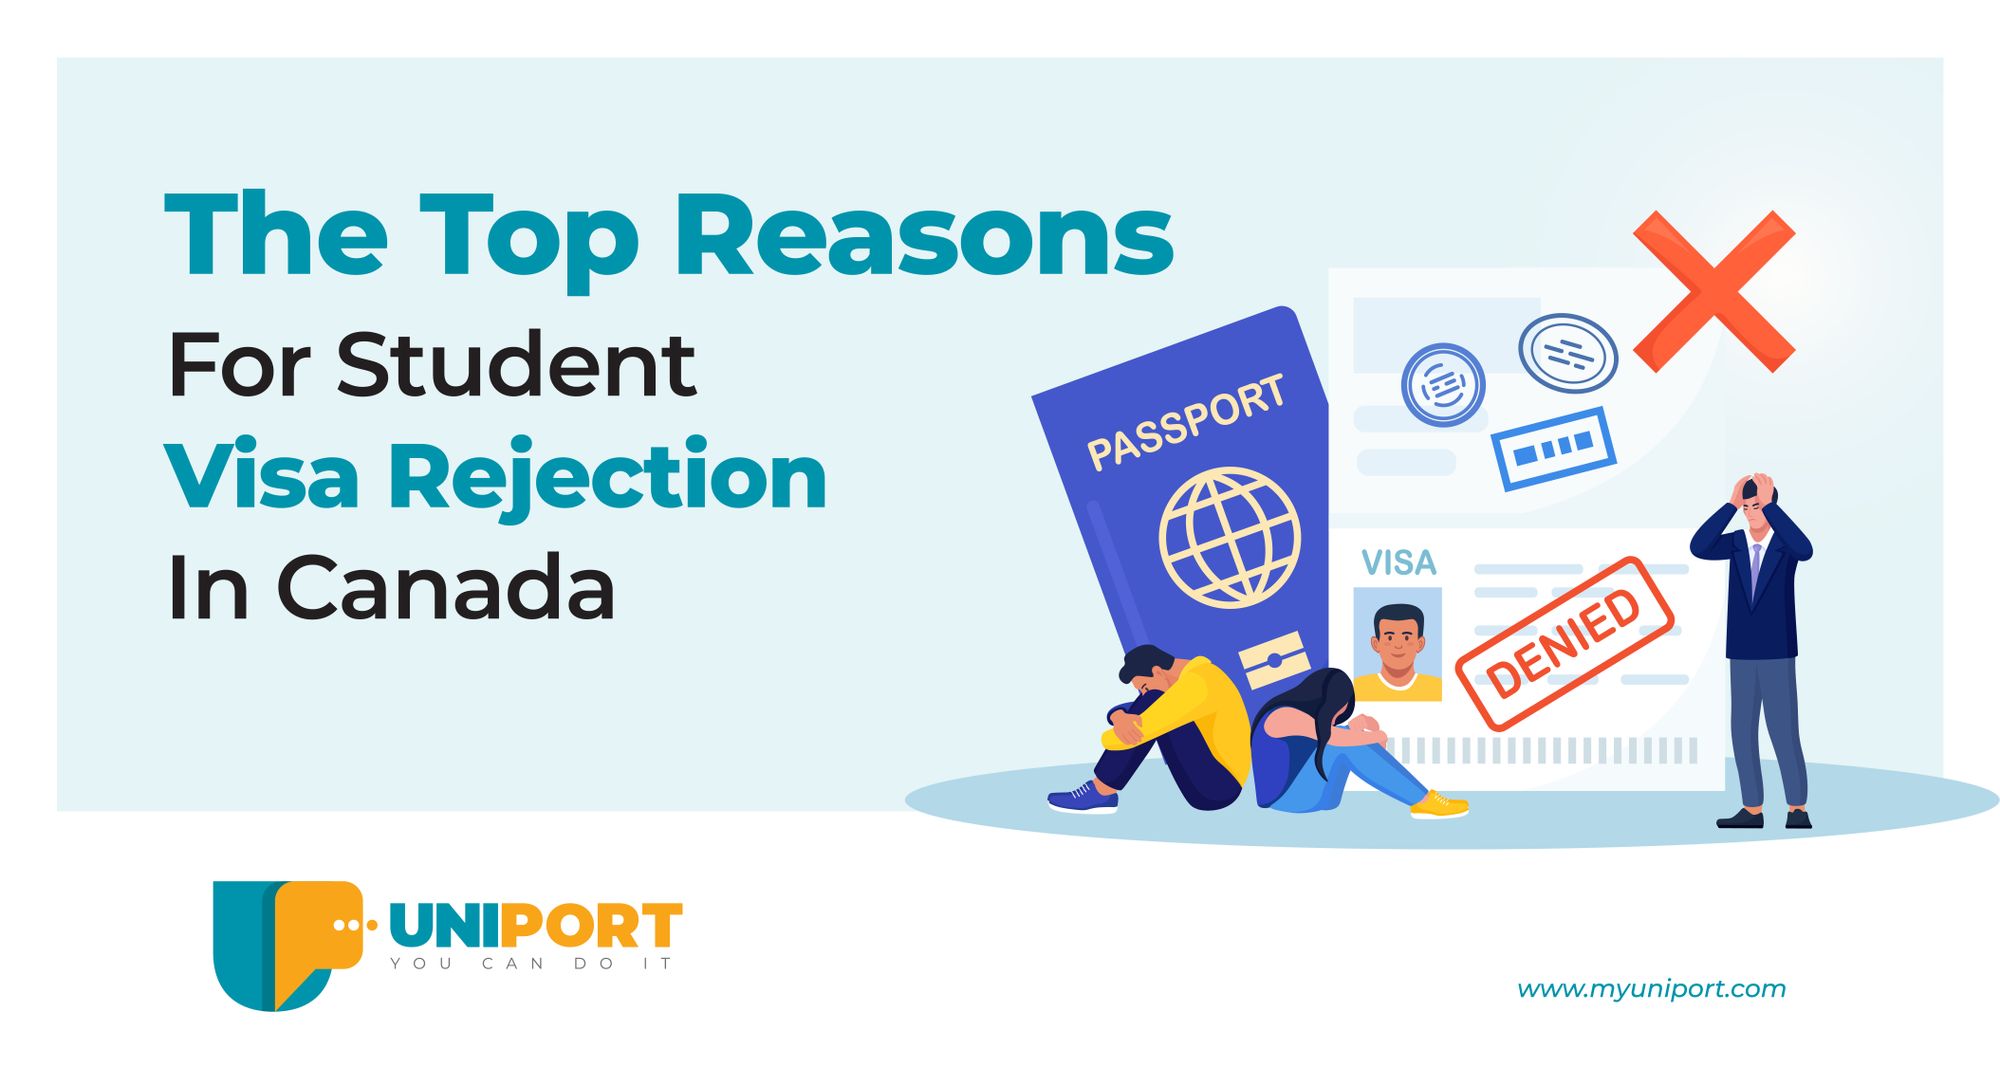 The Top Reasons For Student Visa Rejection In Canada